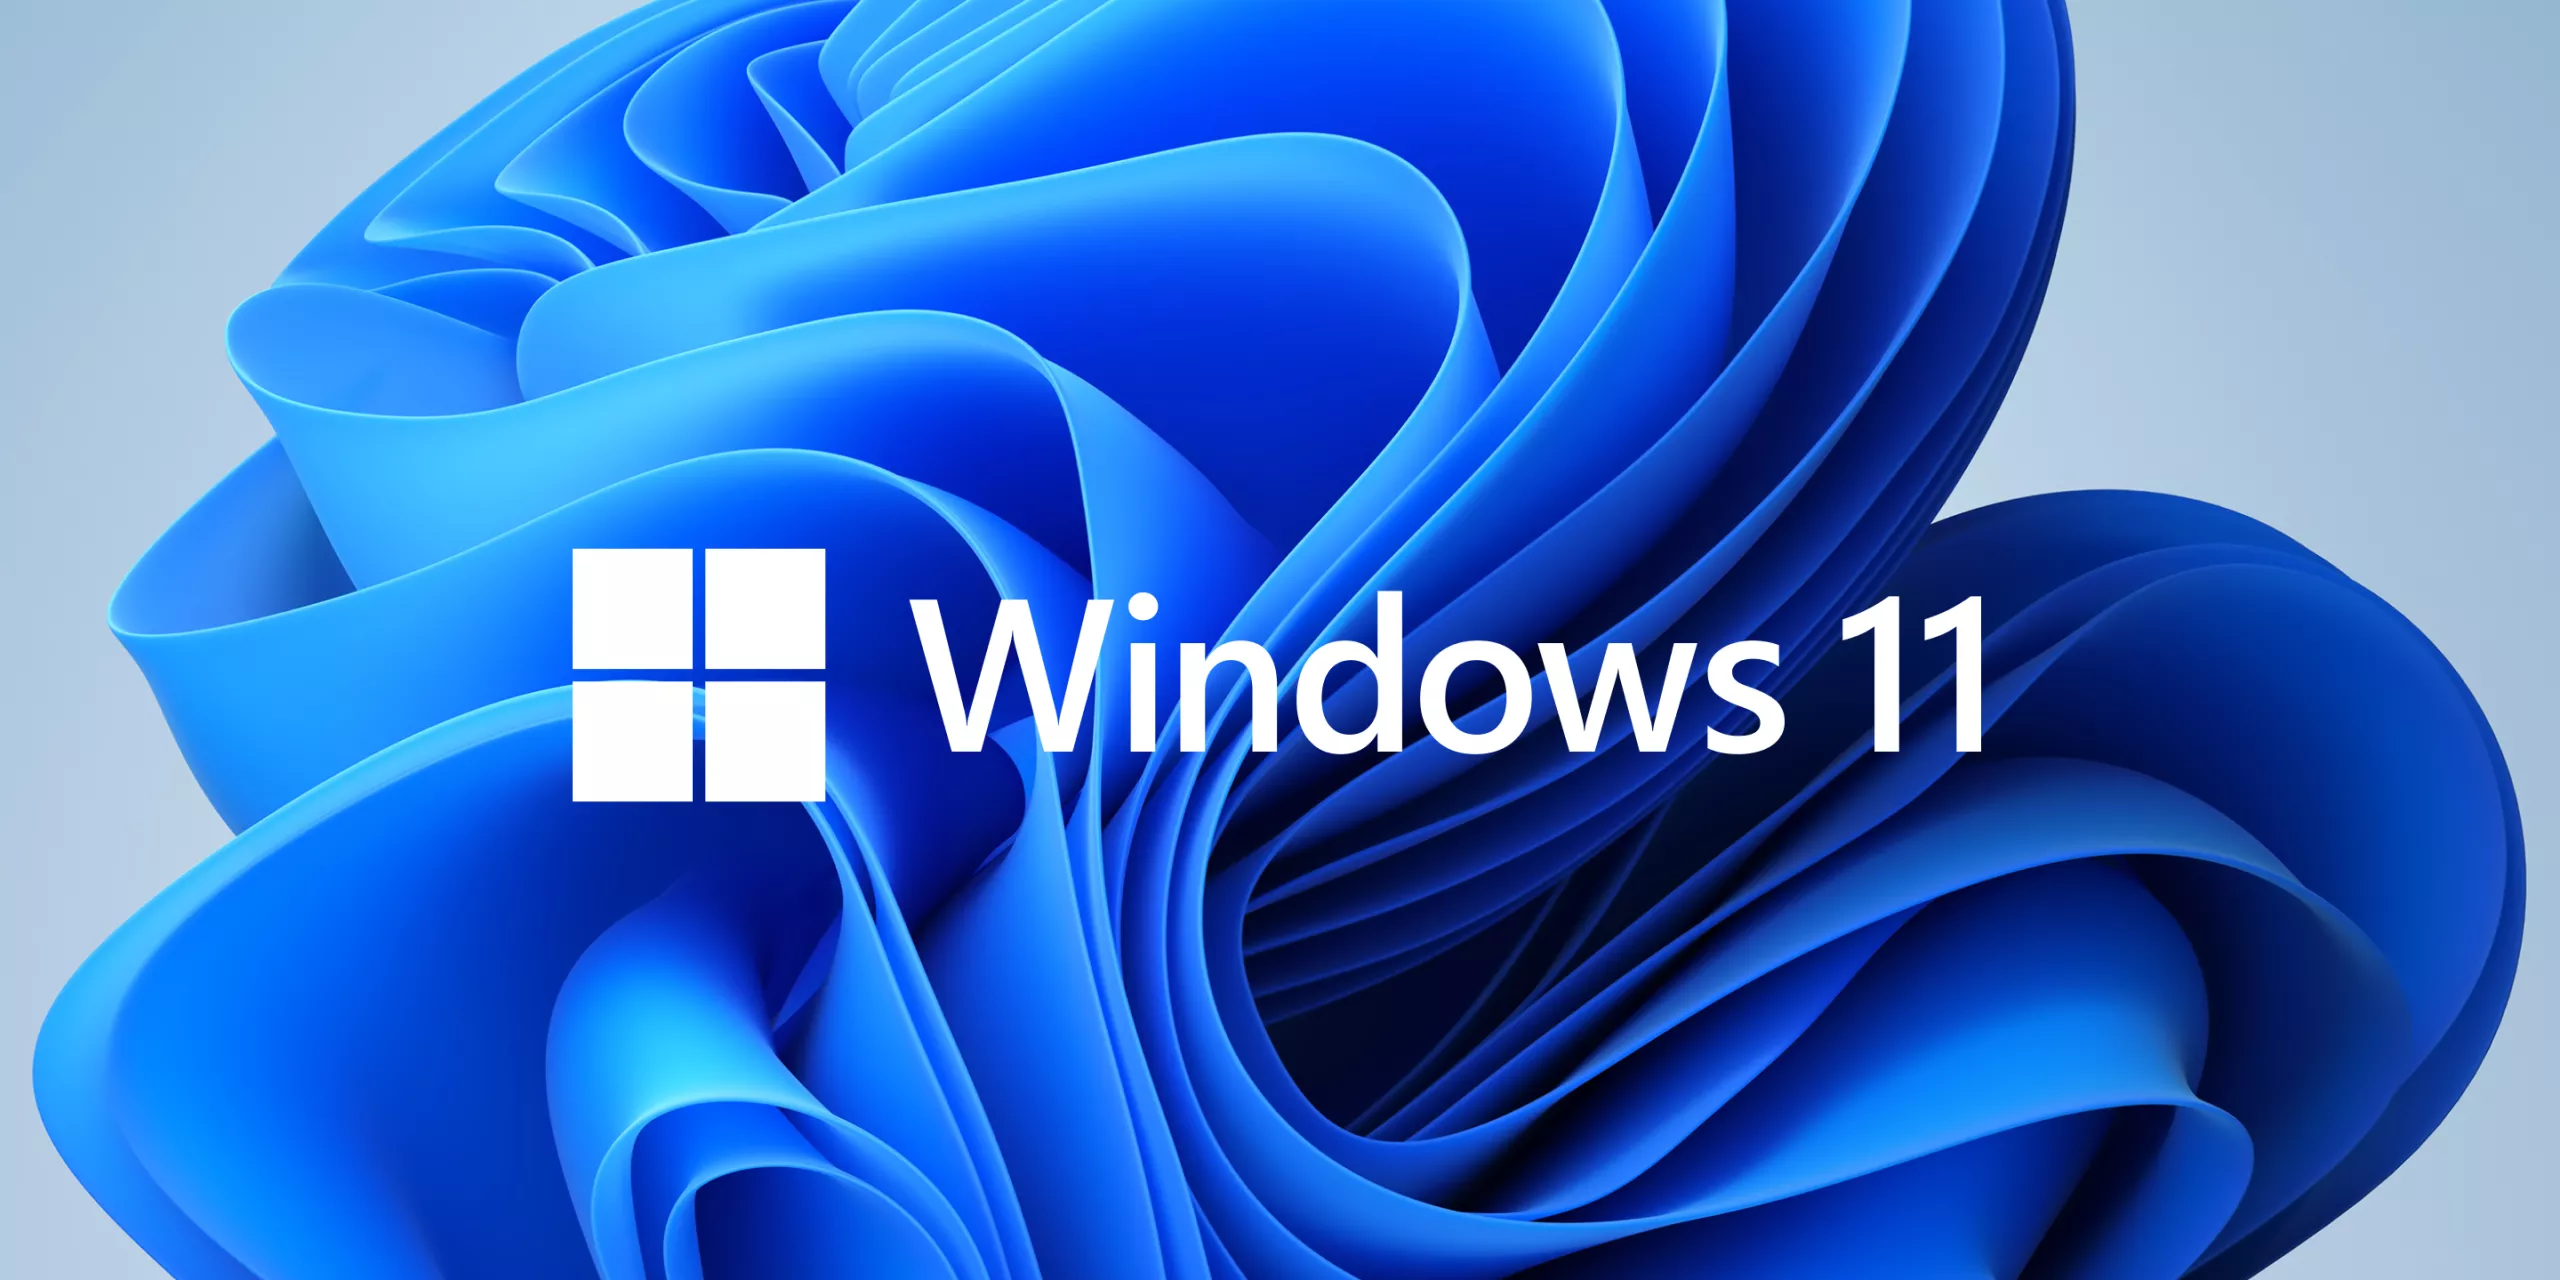 New Windows 11 build made available to Insiders fixes AMD performance issues